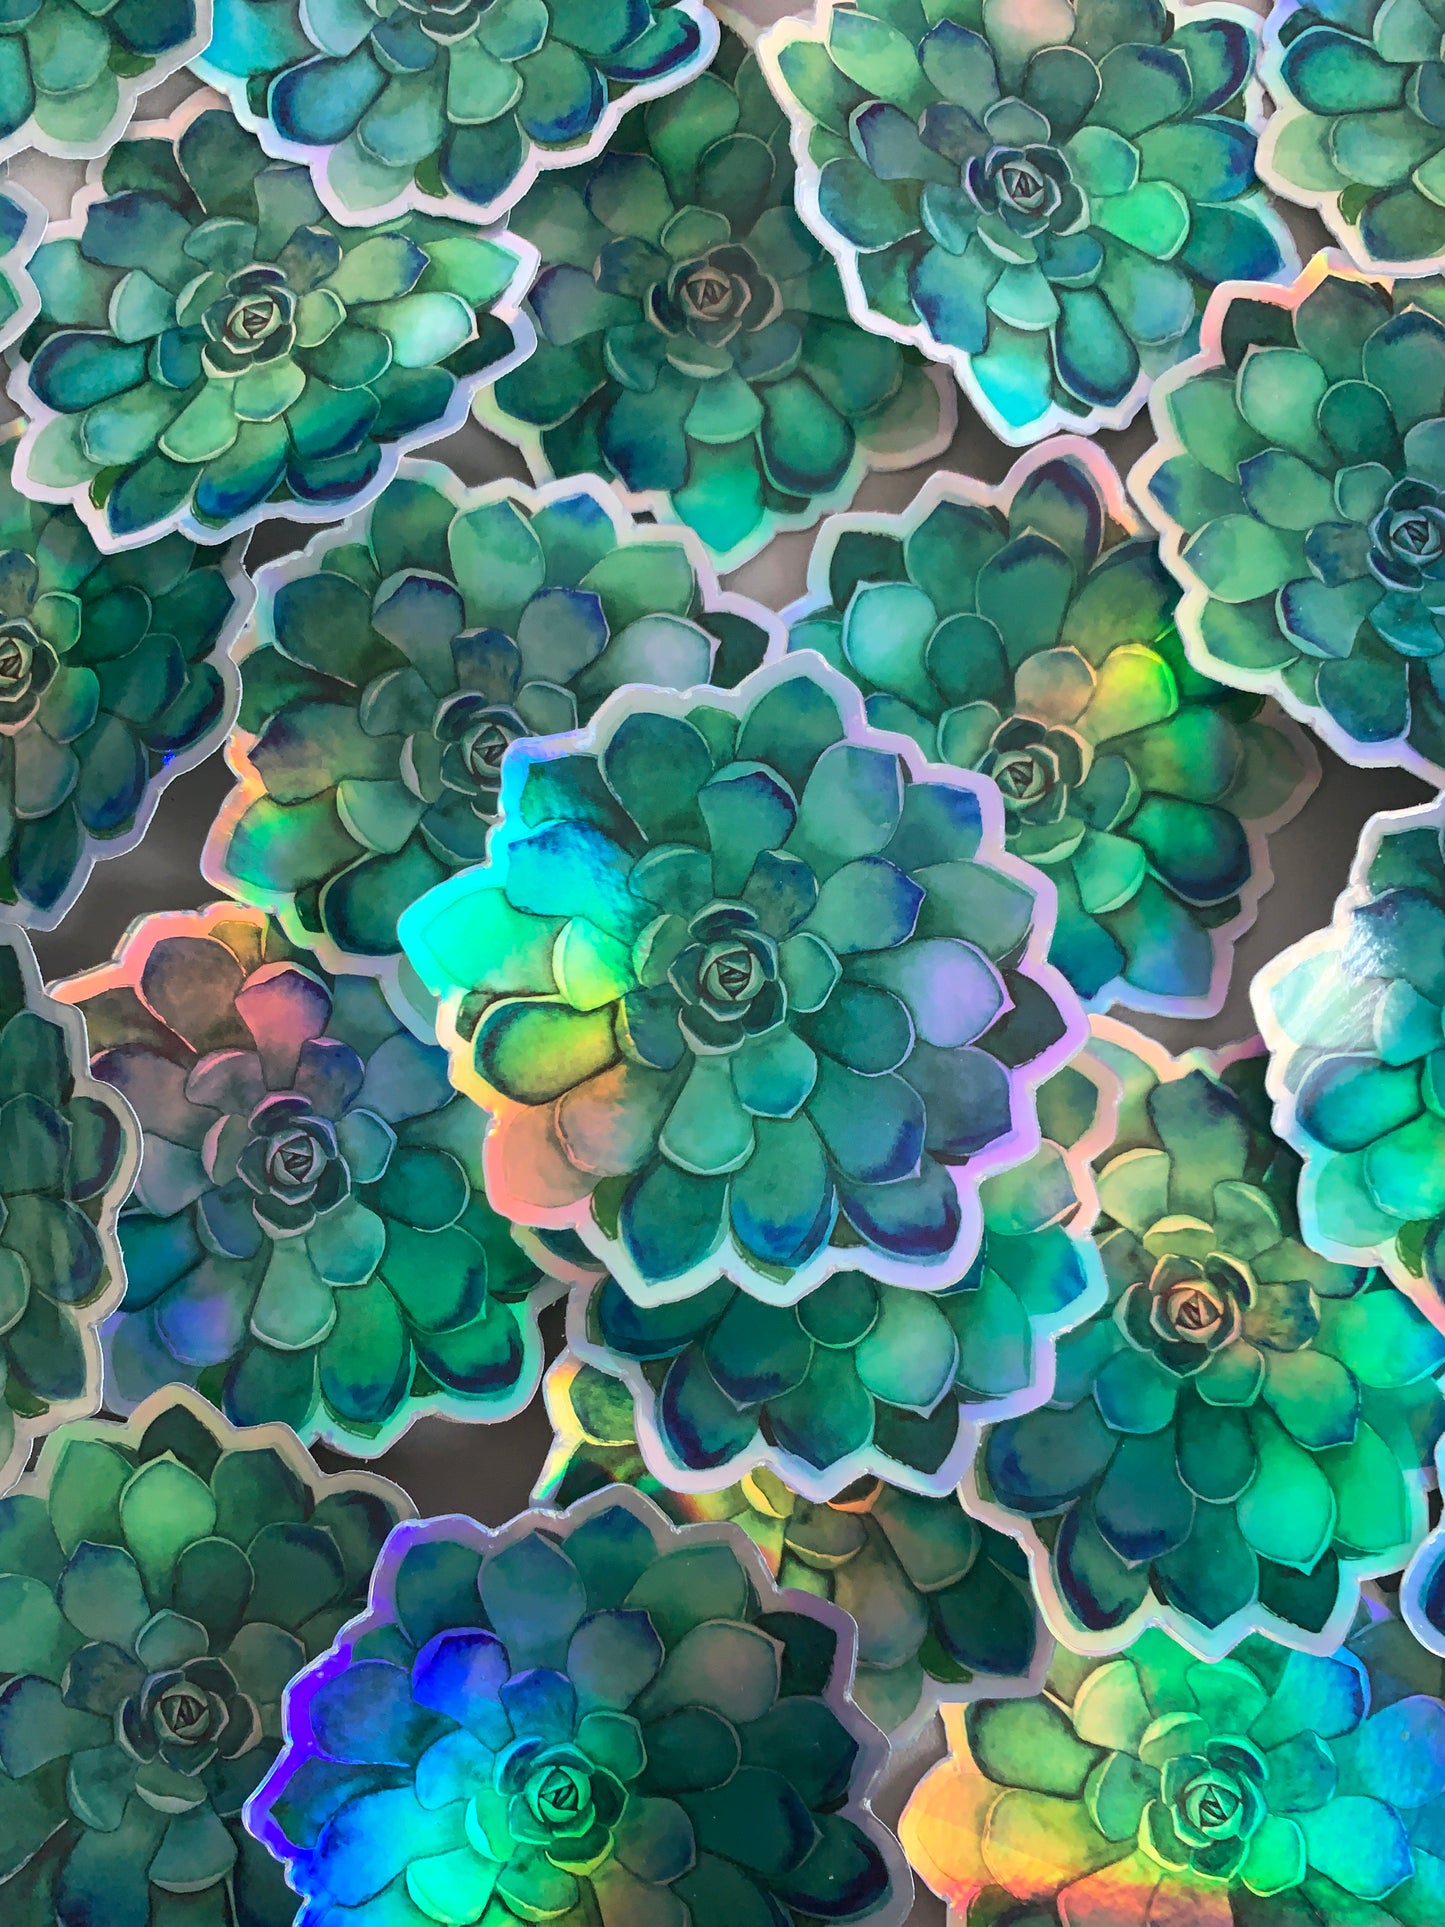 Holographic Teal Succulent Sticker